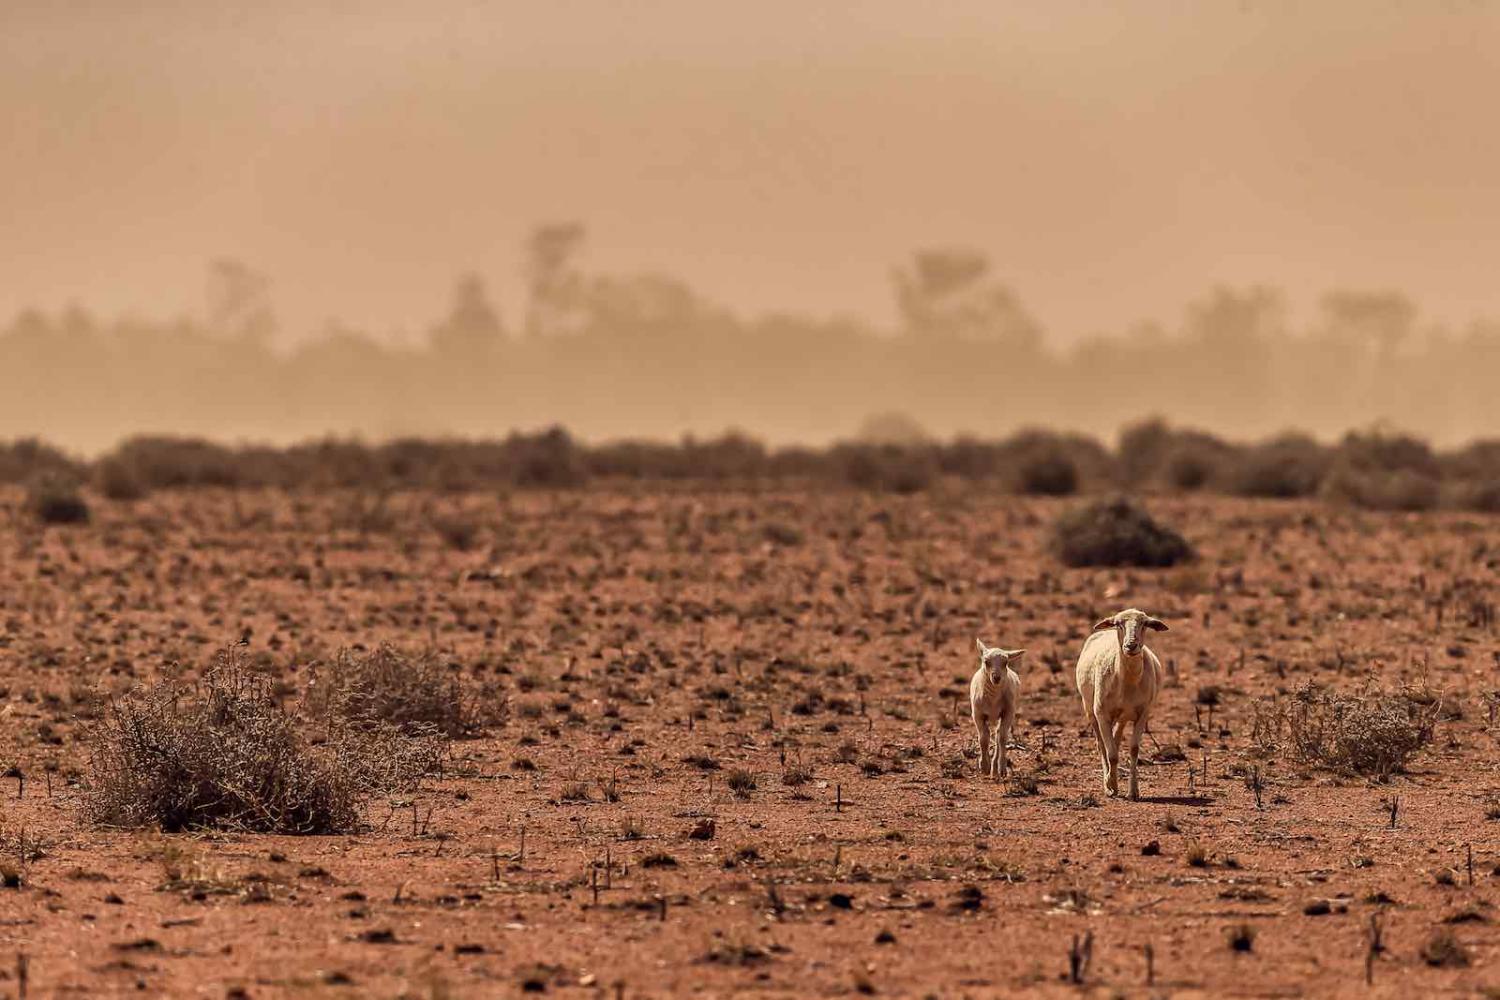 A dust storm on a drought-stricken Australian sheep paddock (Klae Mcguinness/Getty Images)